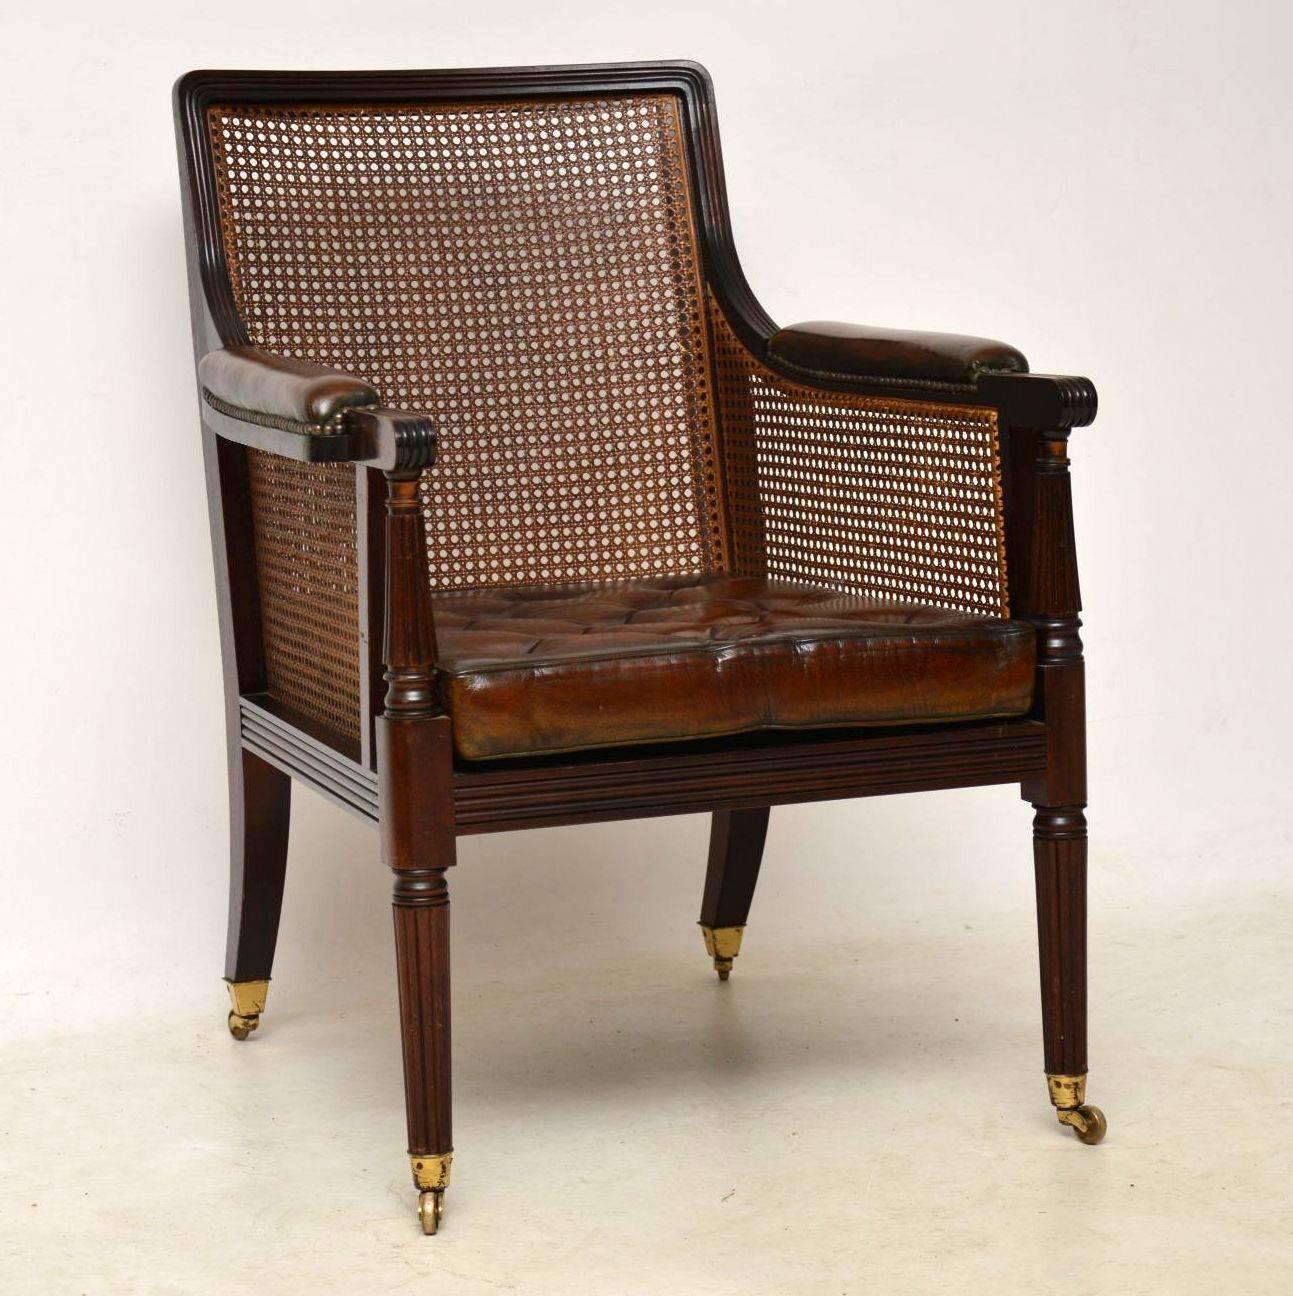 Antique Regency style mahogany bergere library armchair, with buttoned leather cushions, plus cane sides and back. It’s of high quality and in excellent condition. At first glance this chair does look like an original Regency piece, but it is in